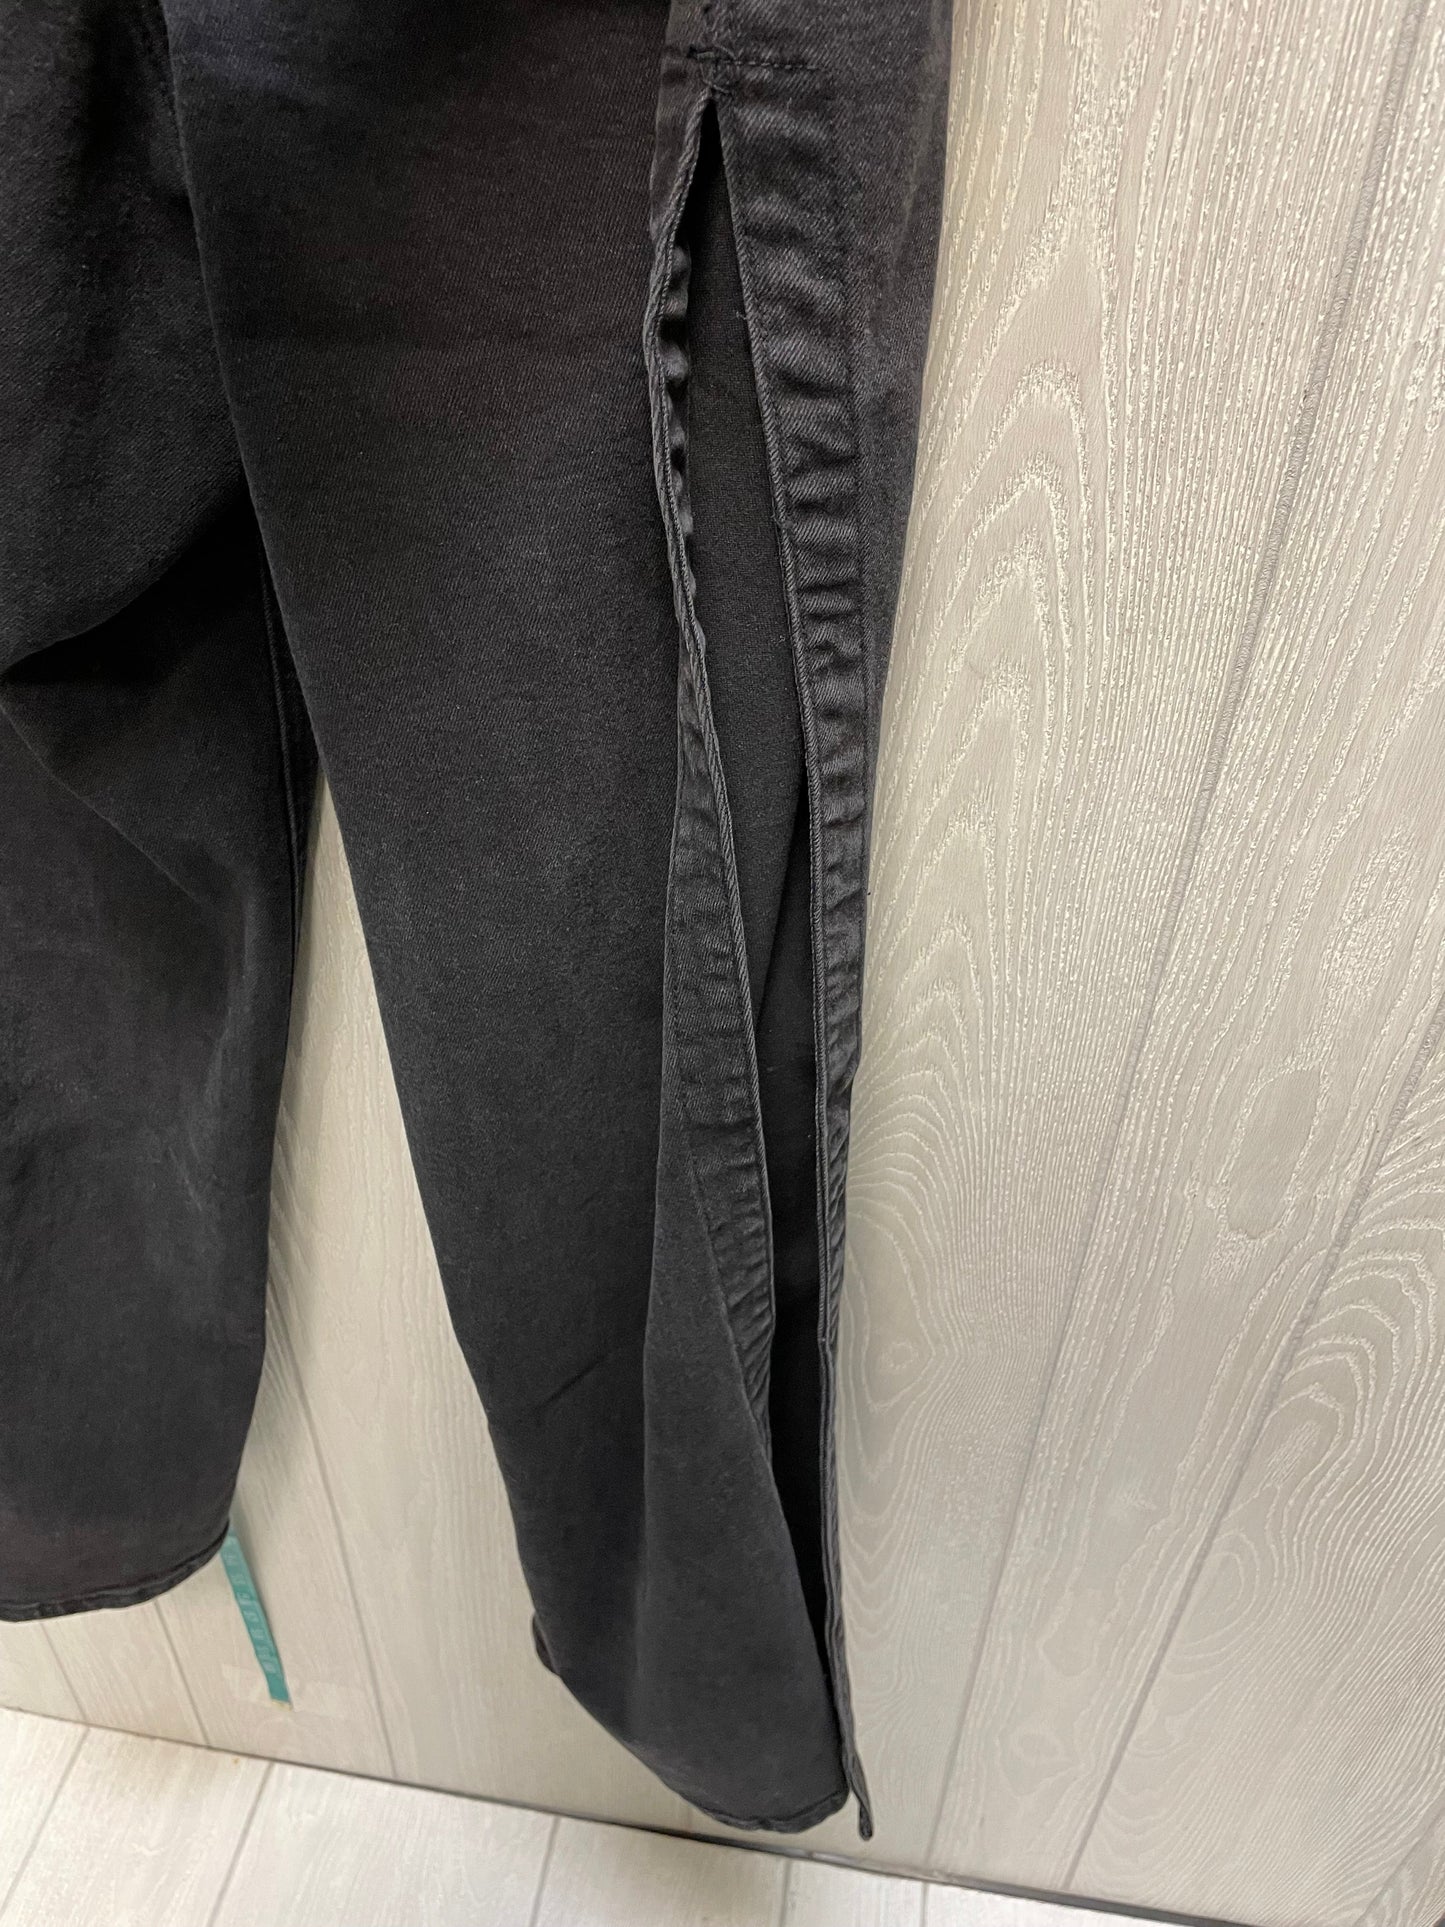 Black Jeans Straight Fashion To Figure, Size 16